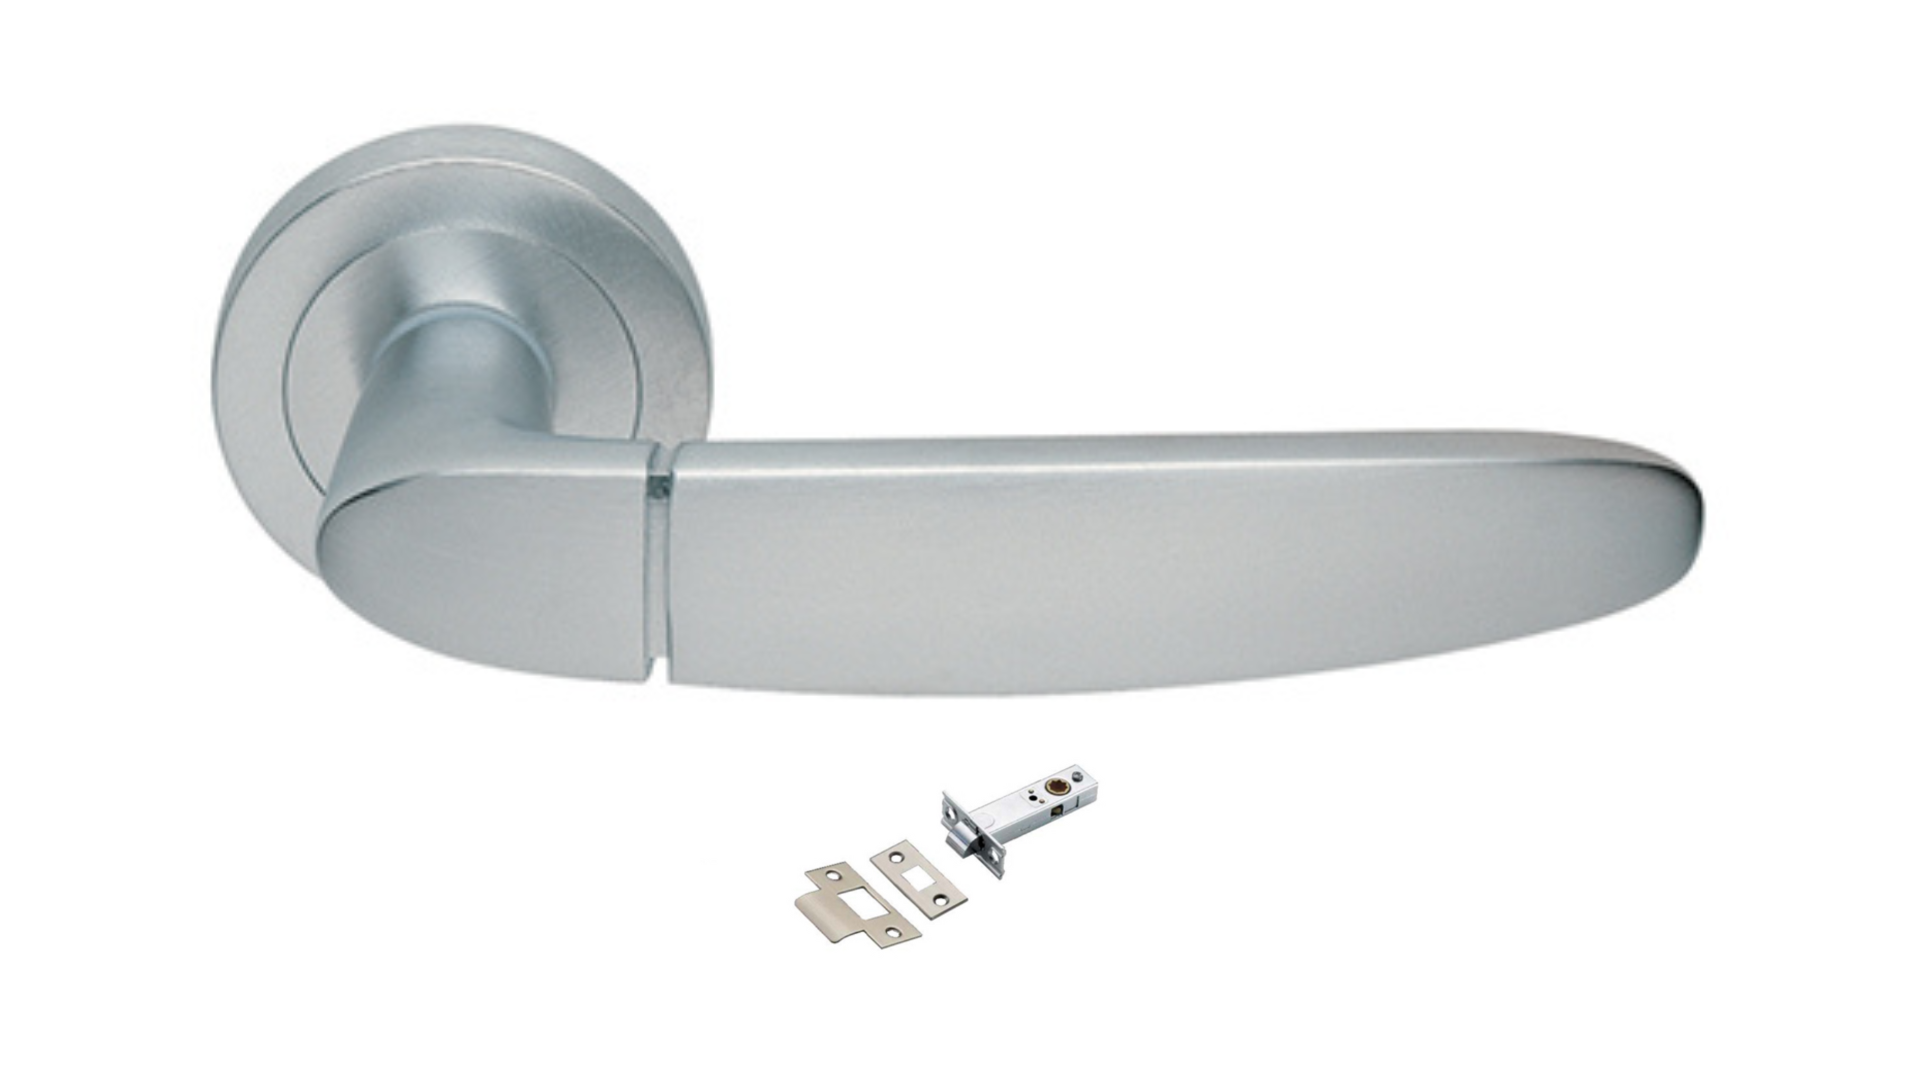 The Atena door handle in Satin Chrome with passage latch included on a white background.